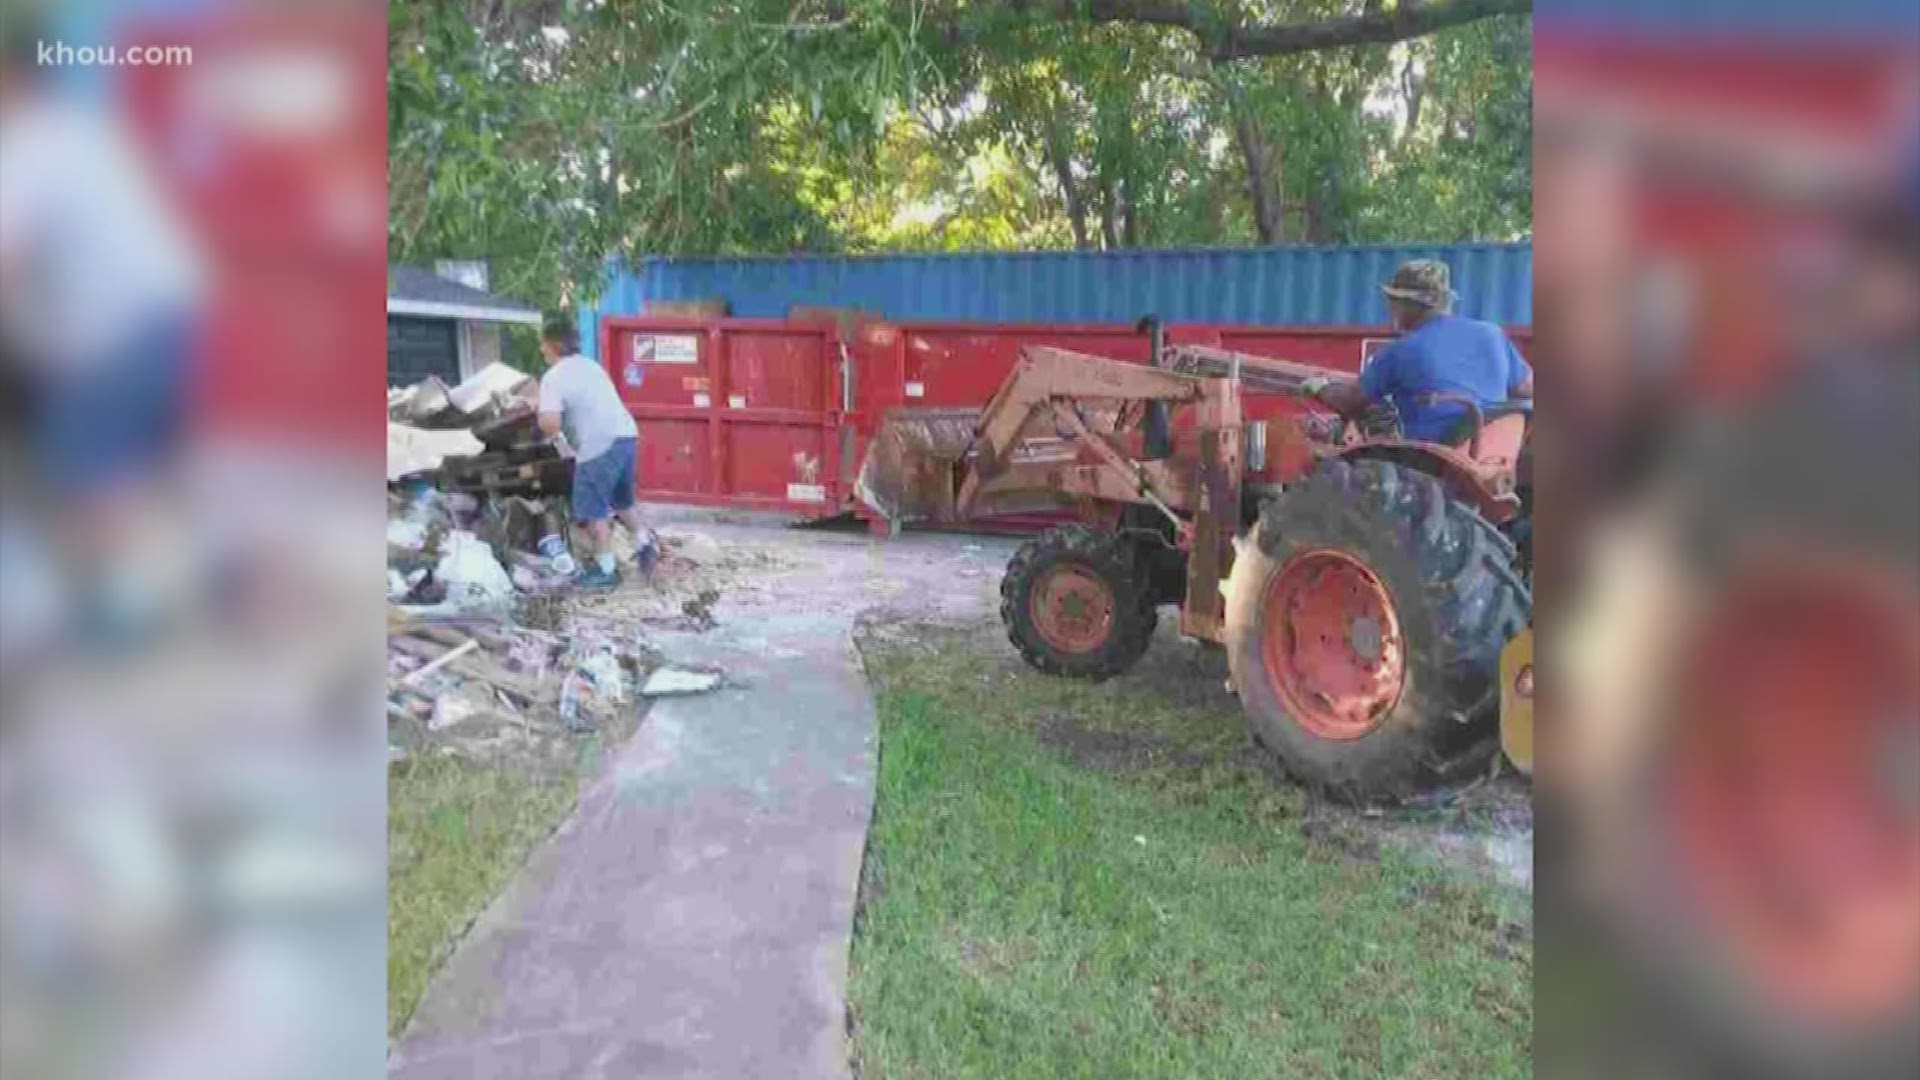 We told you about Fred Mitchelll, who finally moved back into his home near Pearland after Hurricane Harvey. But the contractor who repaired his home left a mountain of debris in his driveway that Mitchell couldn't remove himself. So just 30 minutes after our story aired Thursday, a neighbor showed up with a backhoe and helped load all that garbage into a dumpster.